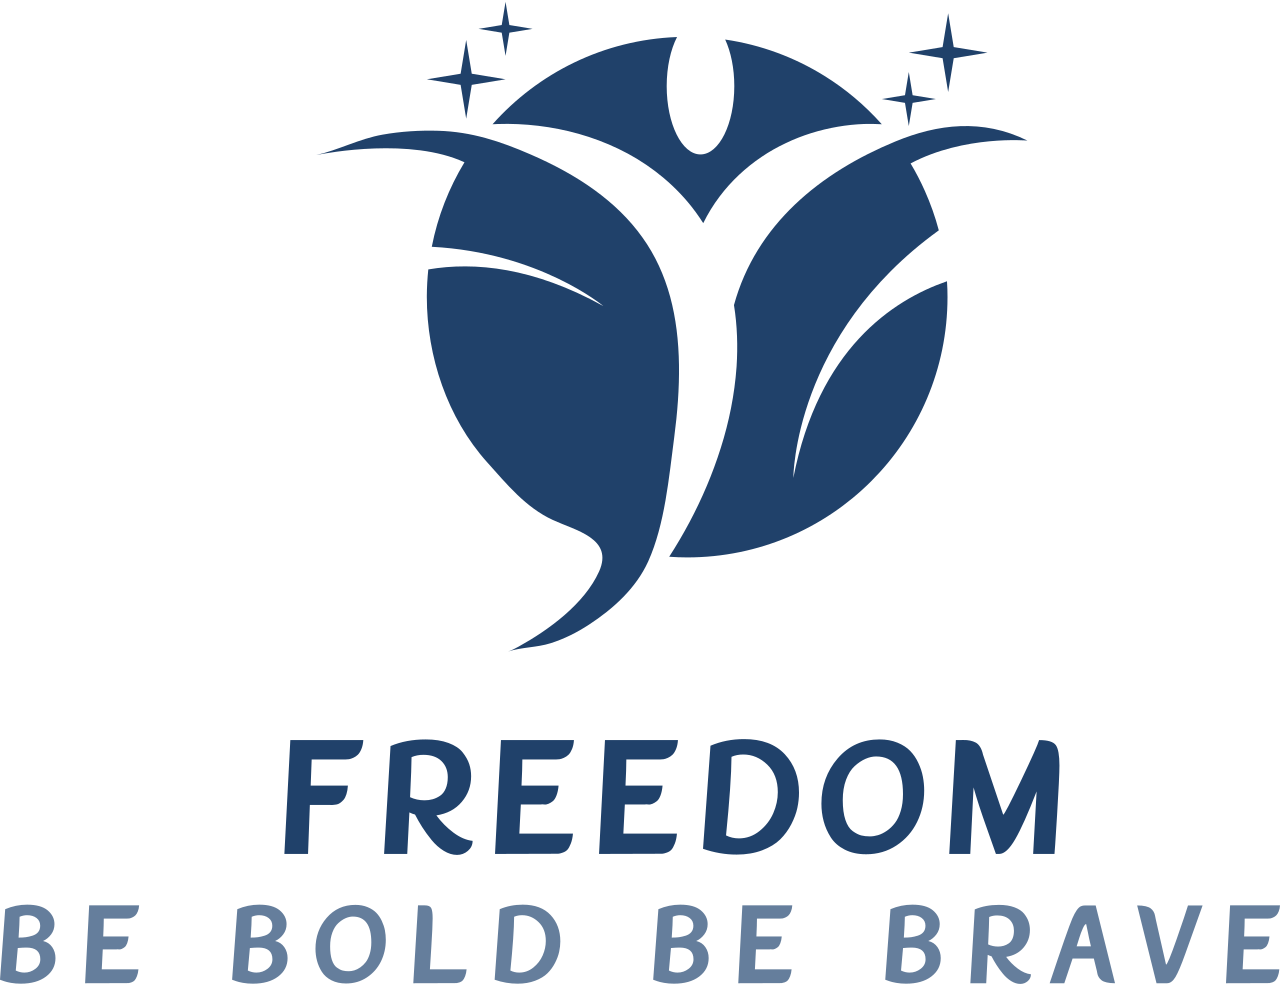 FREEDOM's web page